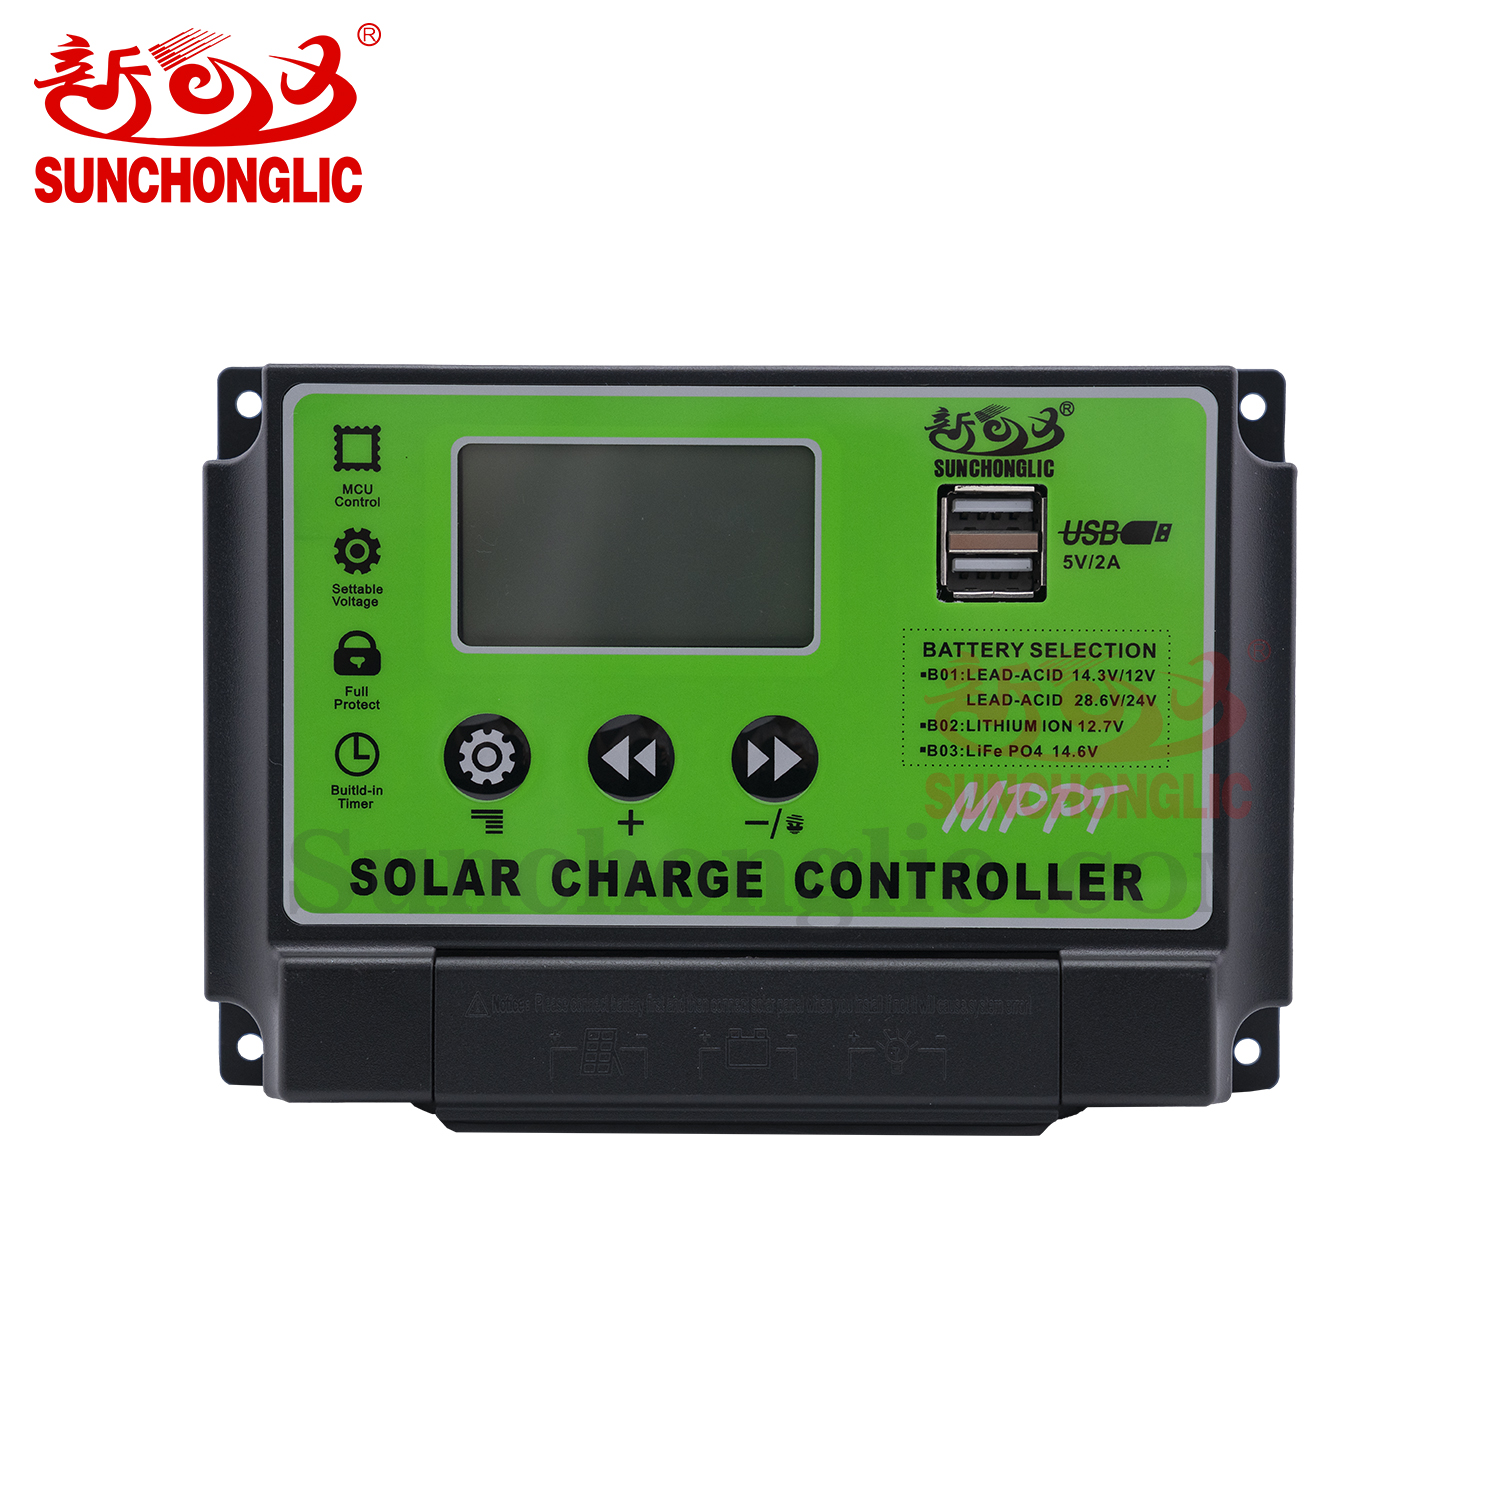 Solar Charge Controller - FT-M1250